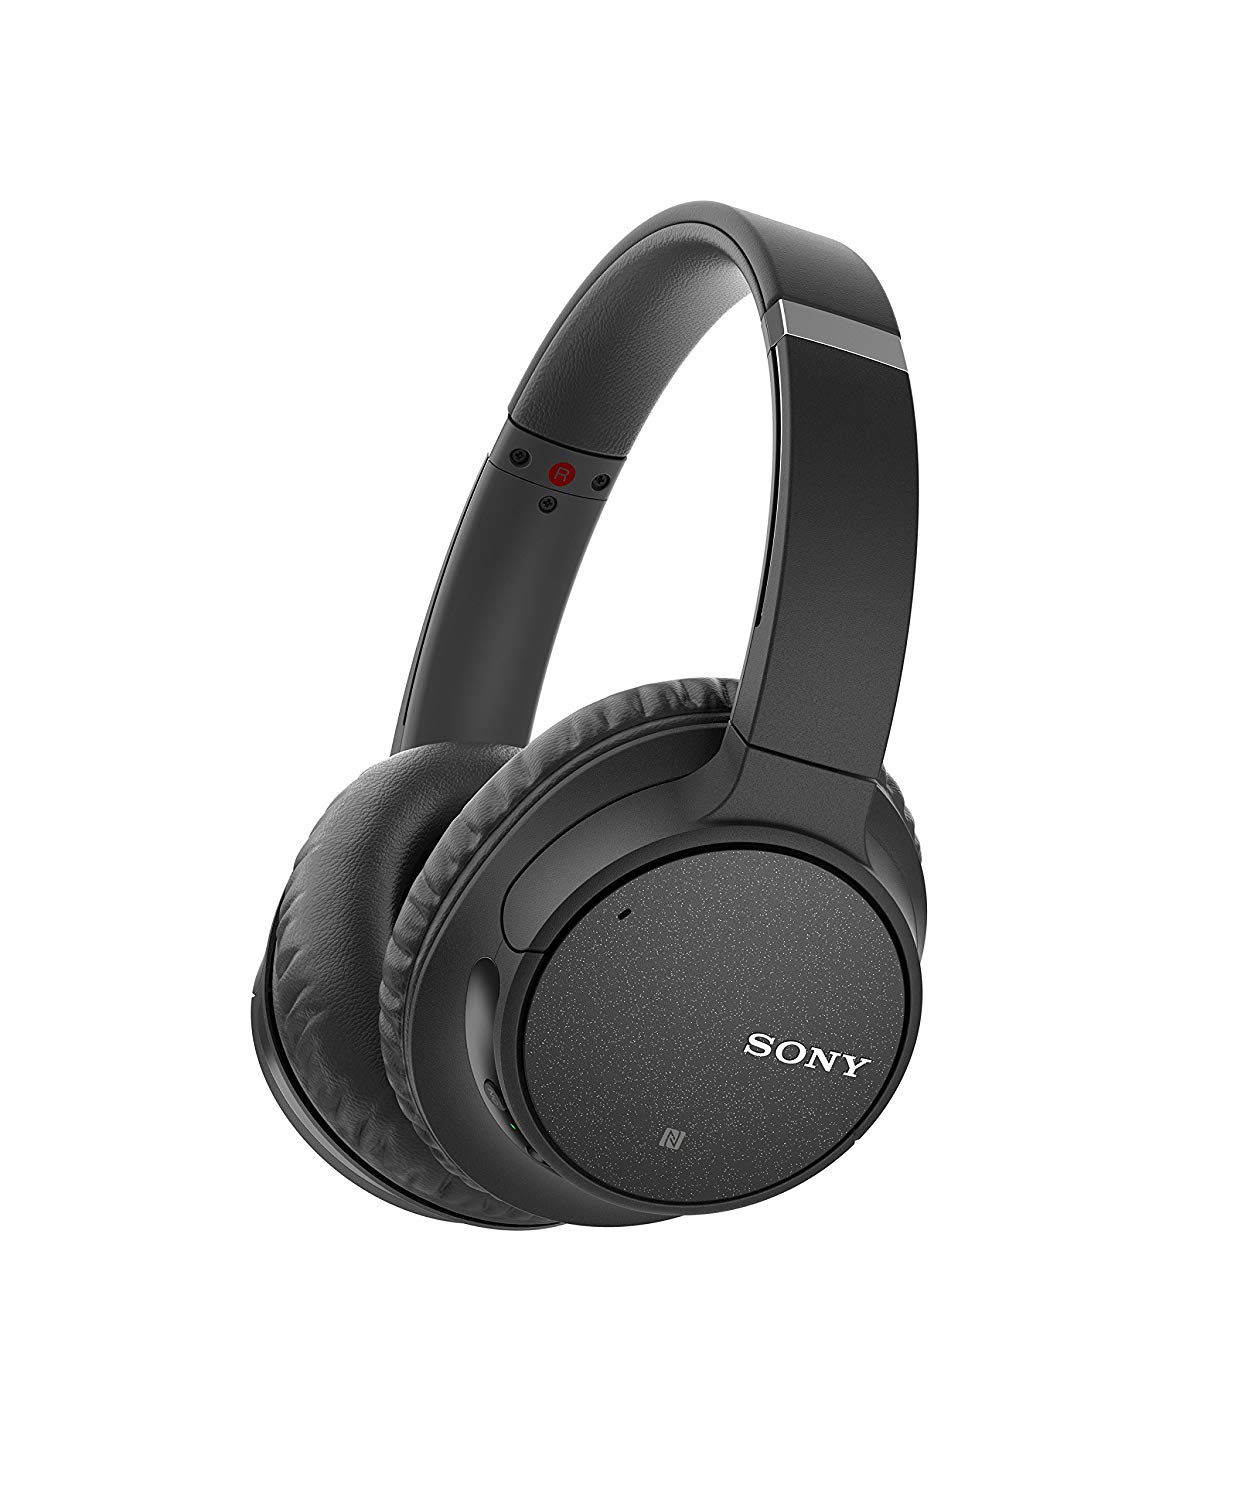 Sony Wireless Noise Canceling Headphones On Sale for 51% Off [Deal]